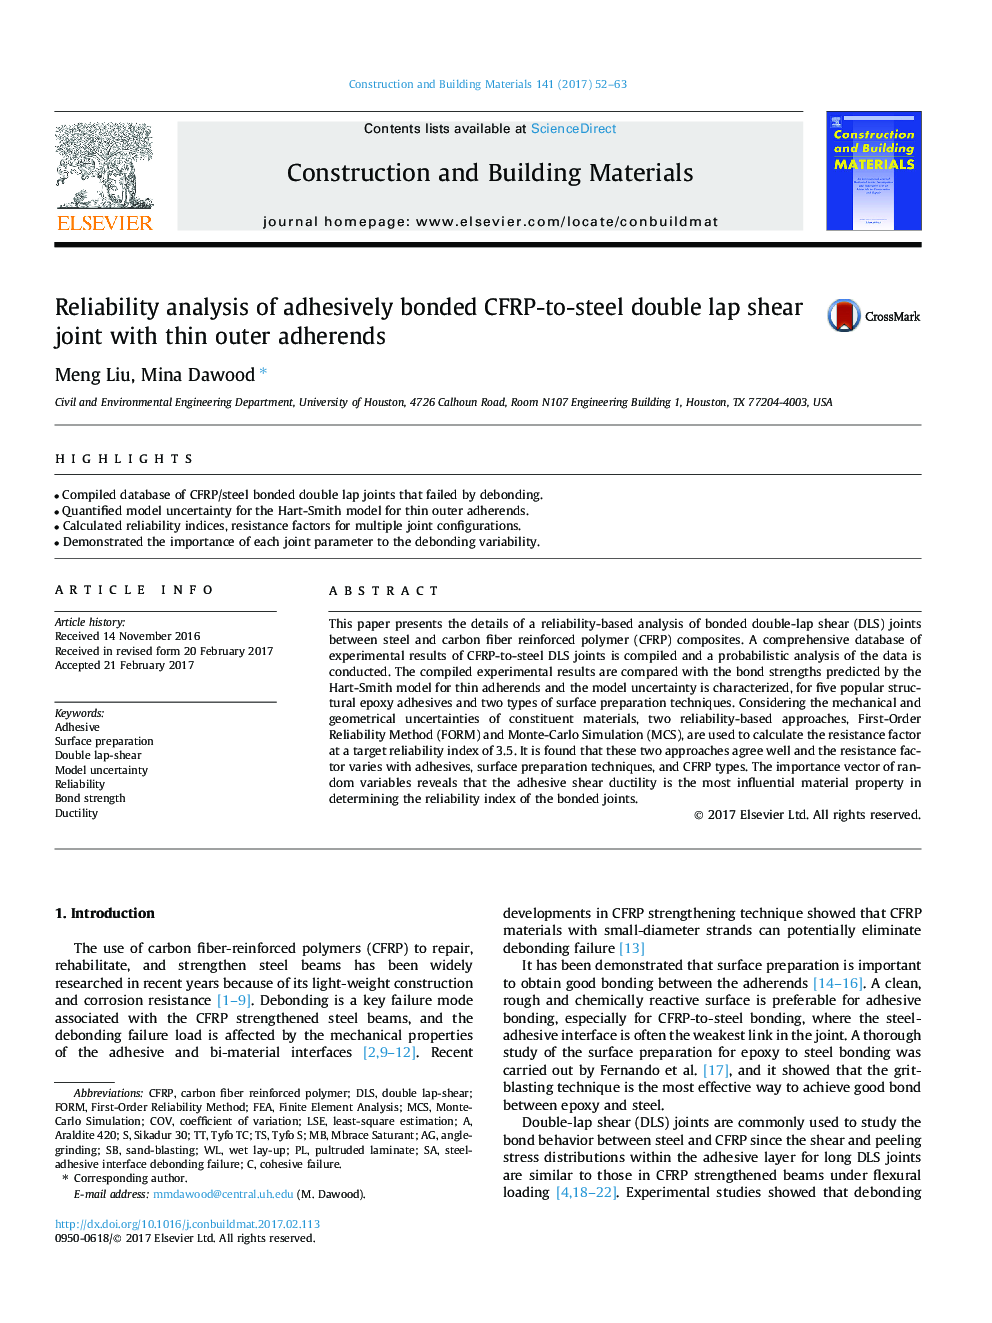 Reliability analysis of adhesively bonded CFRP-to-steel double lap shear joint with thin outer adherends